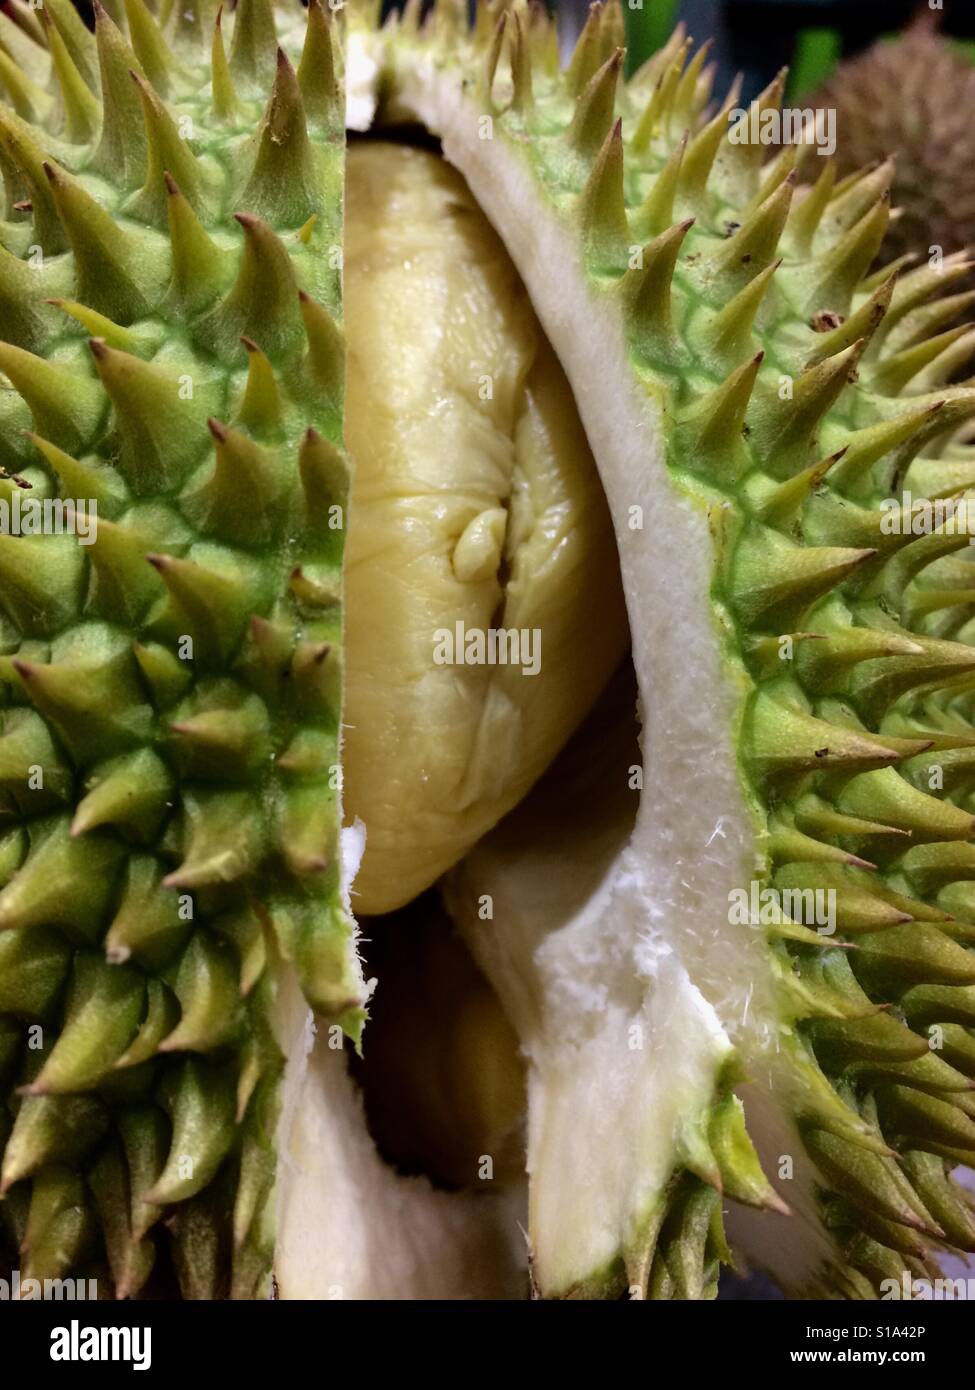 Durio zibethinus is the most common tree species in the genus Durio that are known as durian and have edible fruit also known as durian. Stock Photo